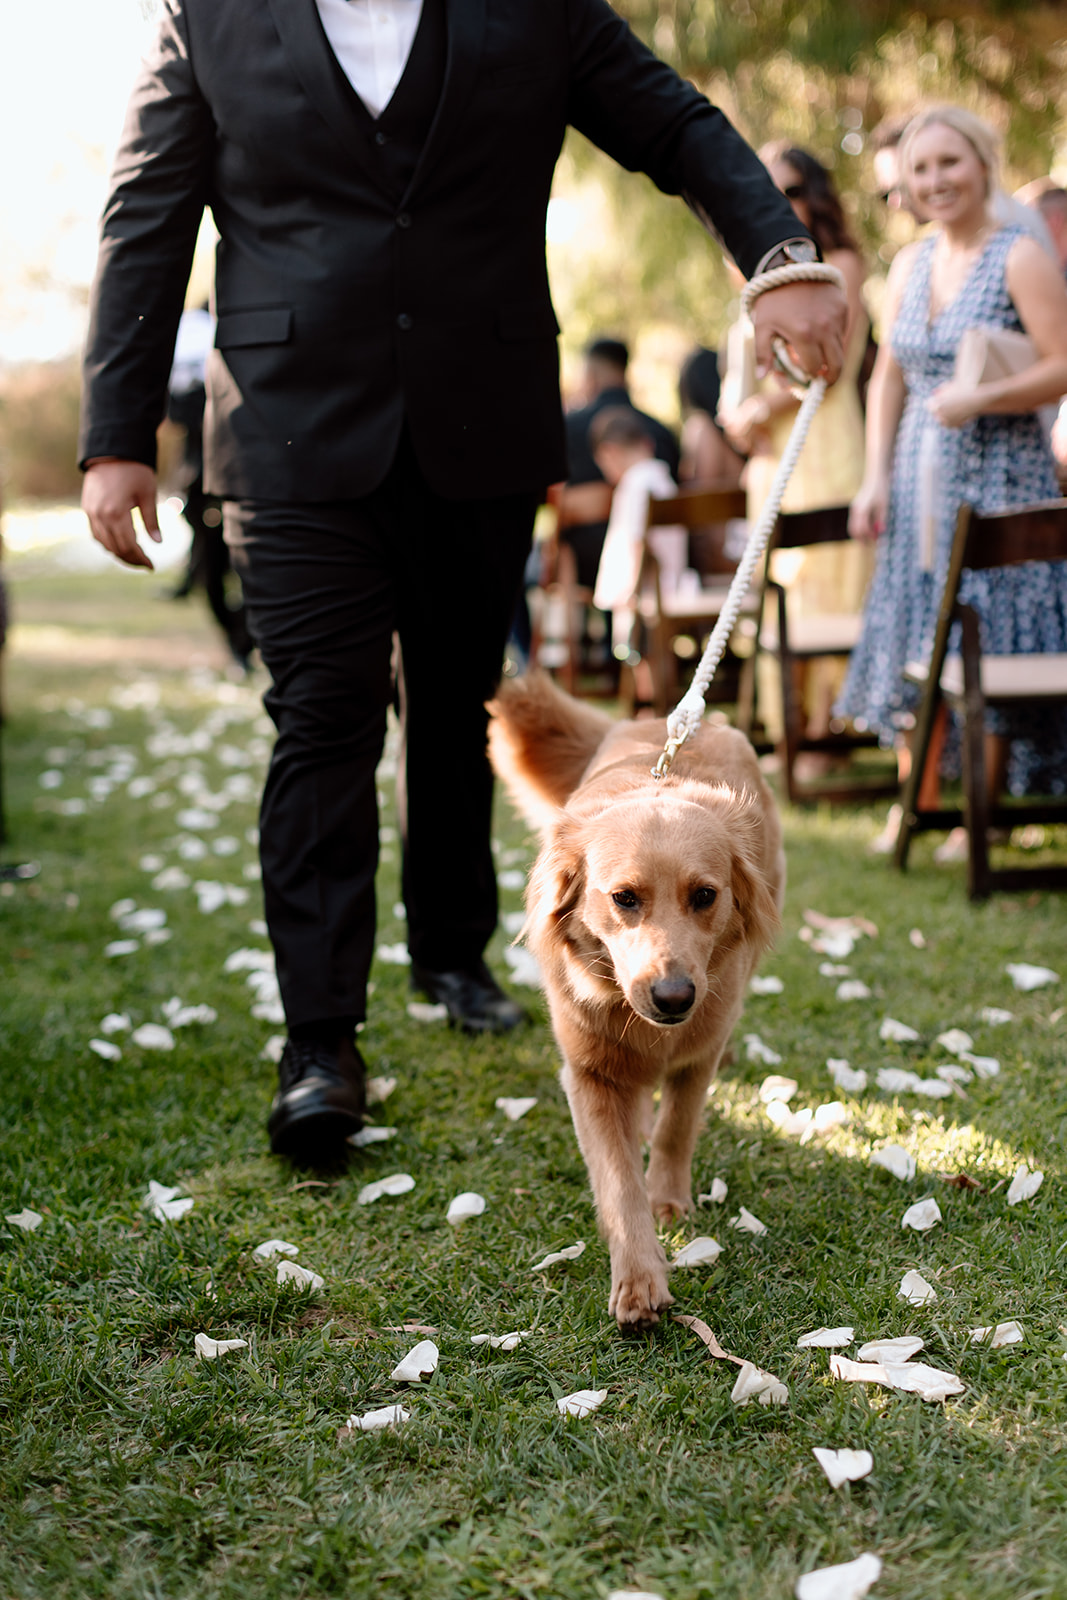 candid image of wedding couple's dog walking down aisle  on wedding day at galway downs temecula california